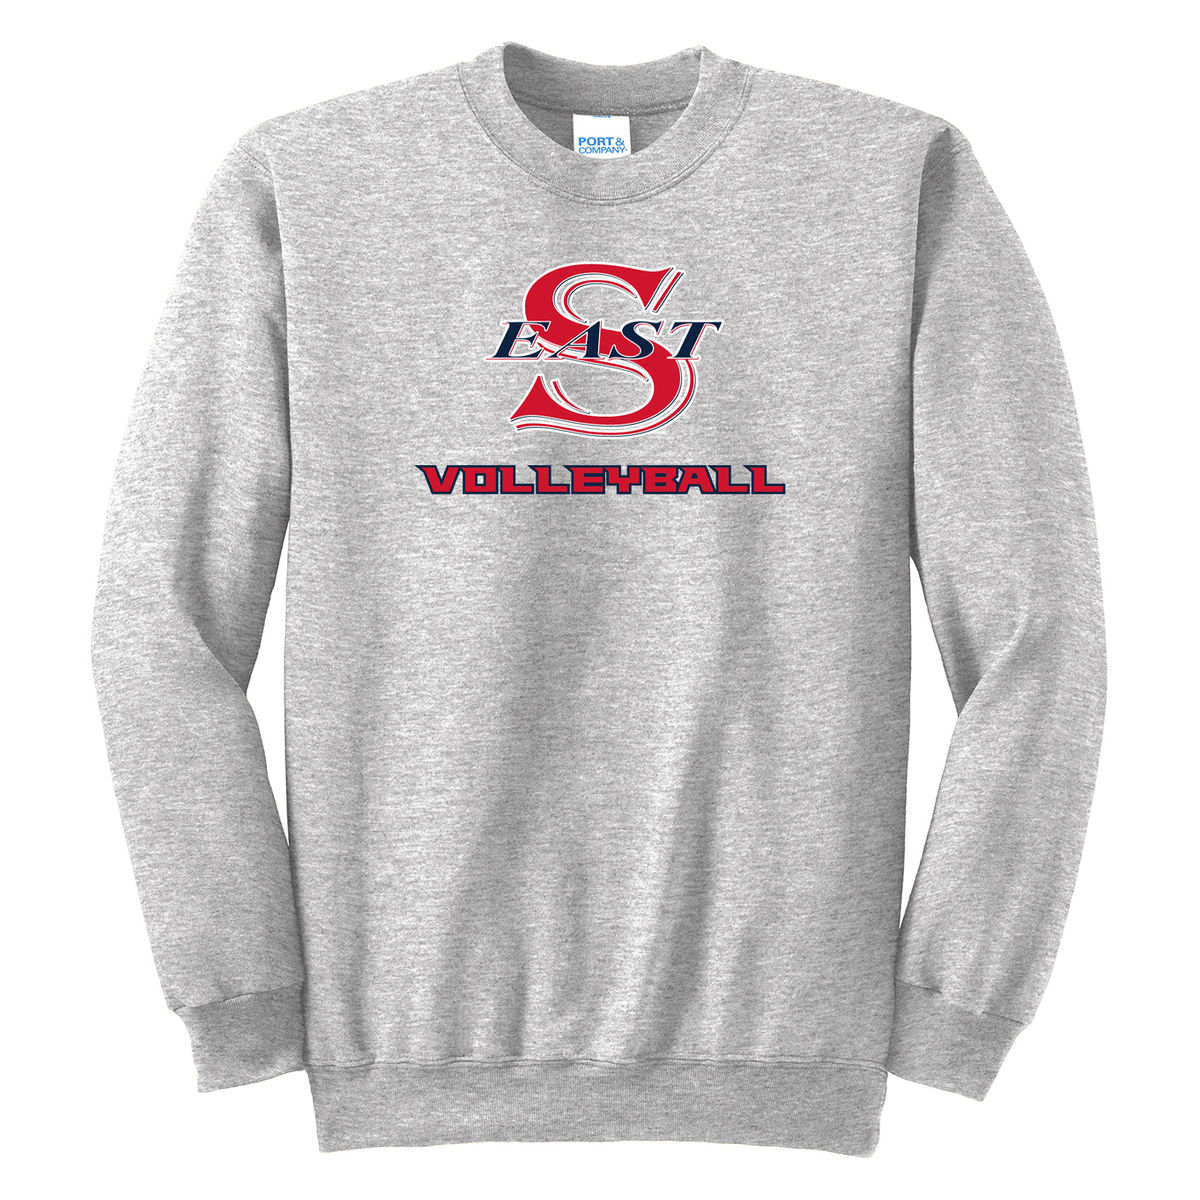 Smithtown East Volleyball Crew Neck Sweater